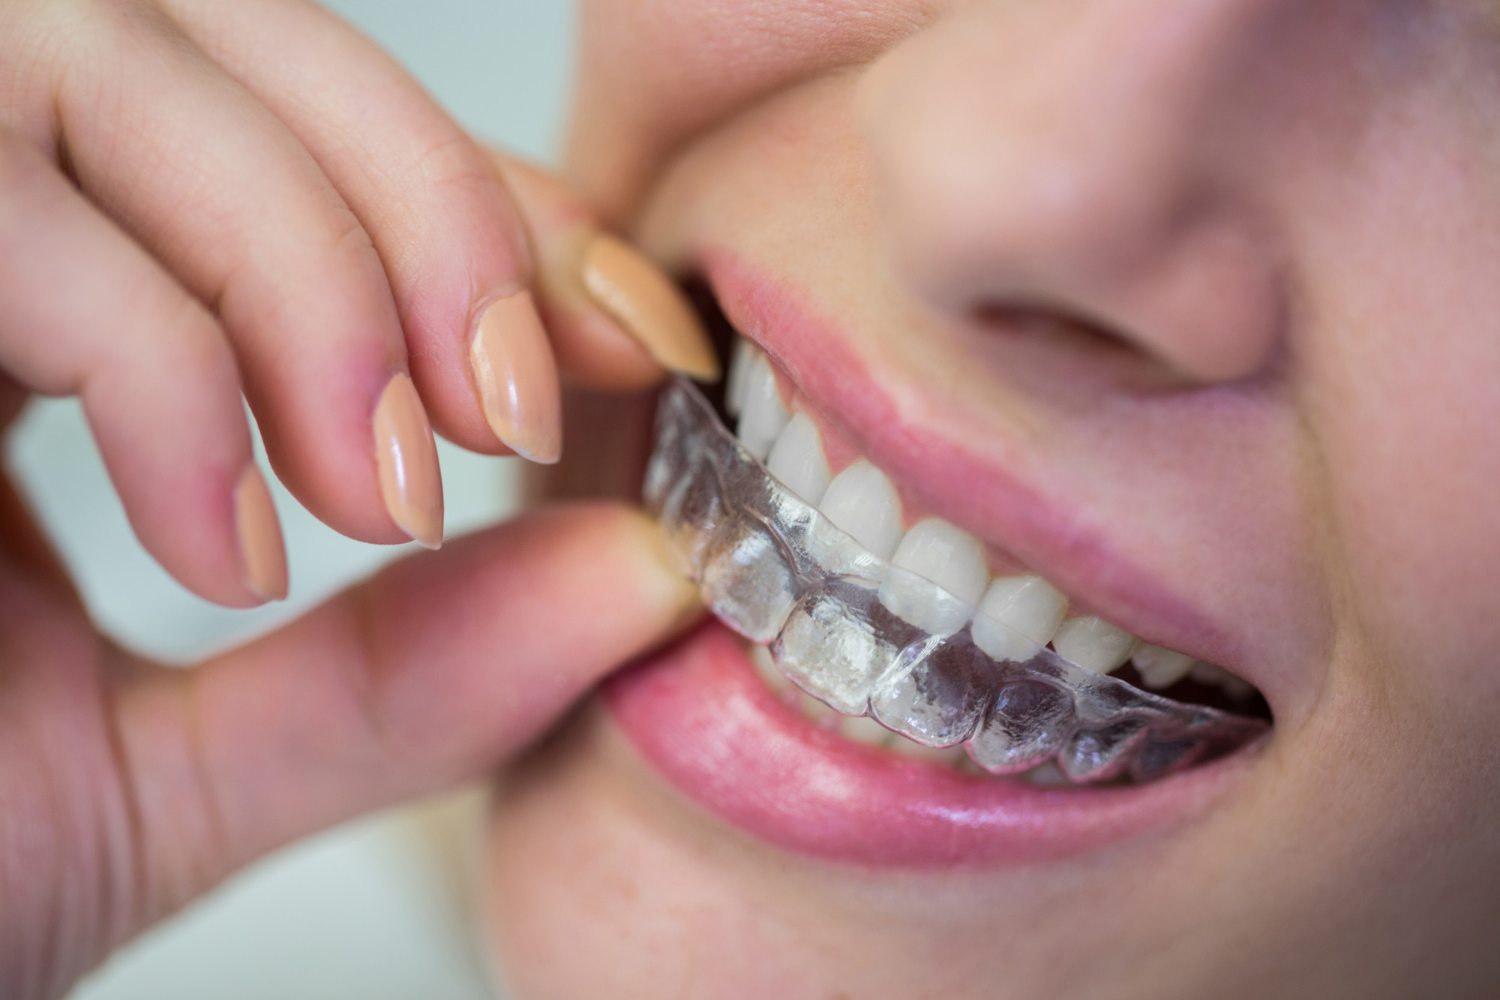 Ceramic Braces vs Invisalign: Which One Is Best Option For You?